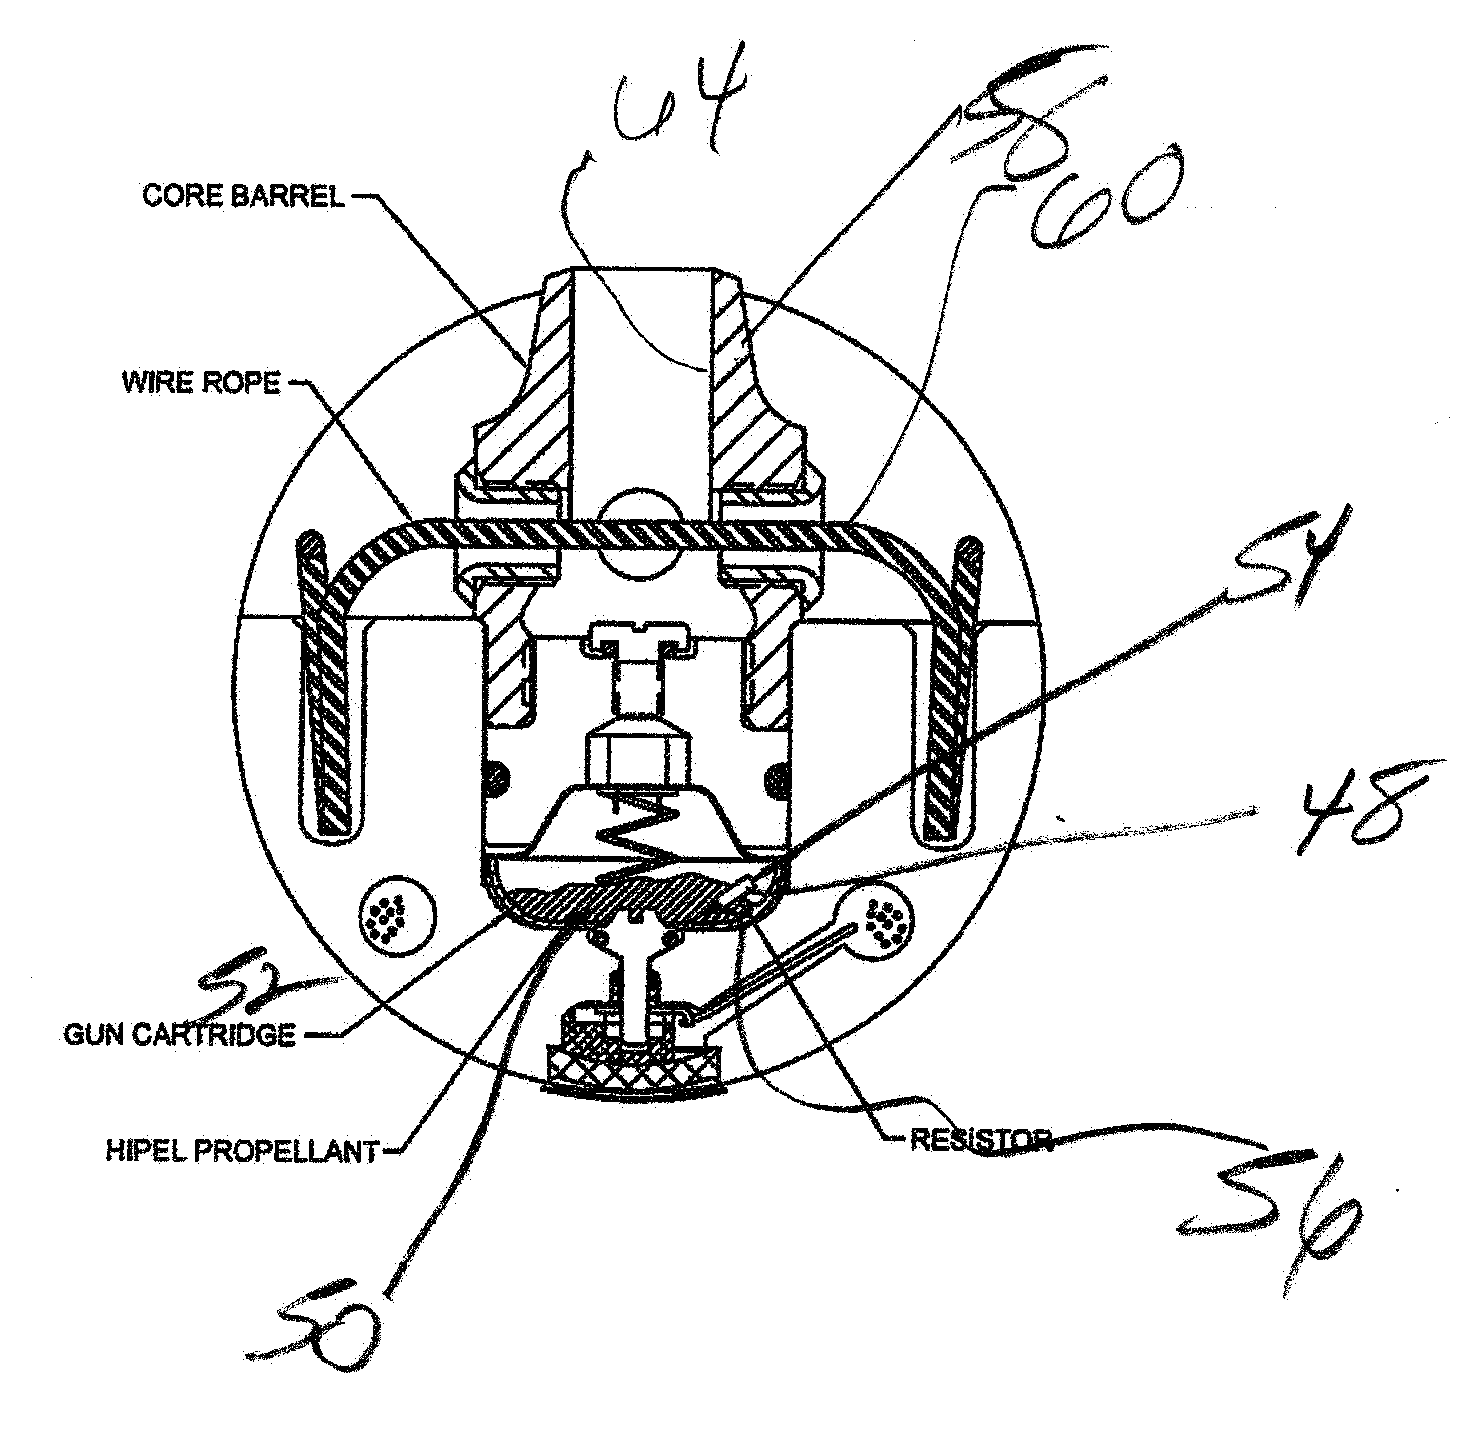 Resistor-based Ignition System for a Core Gun